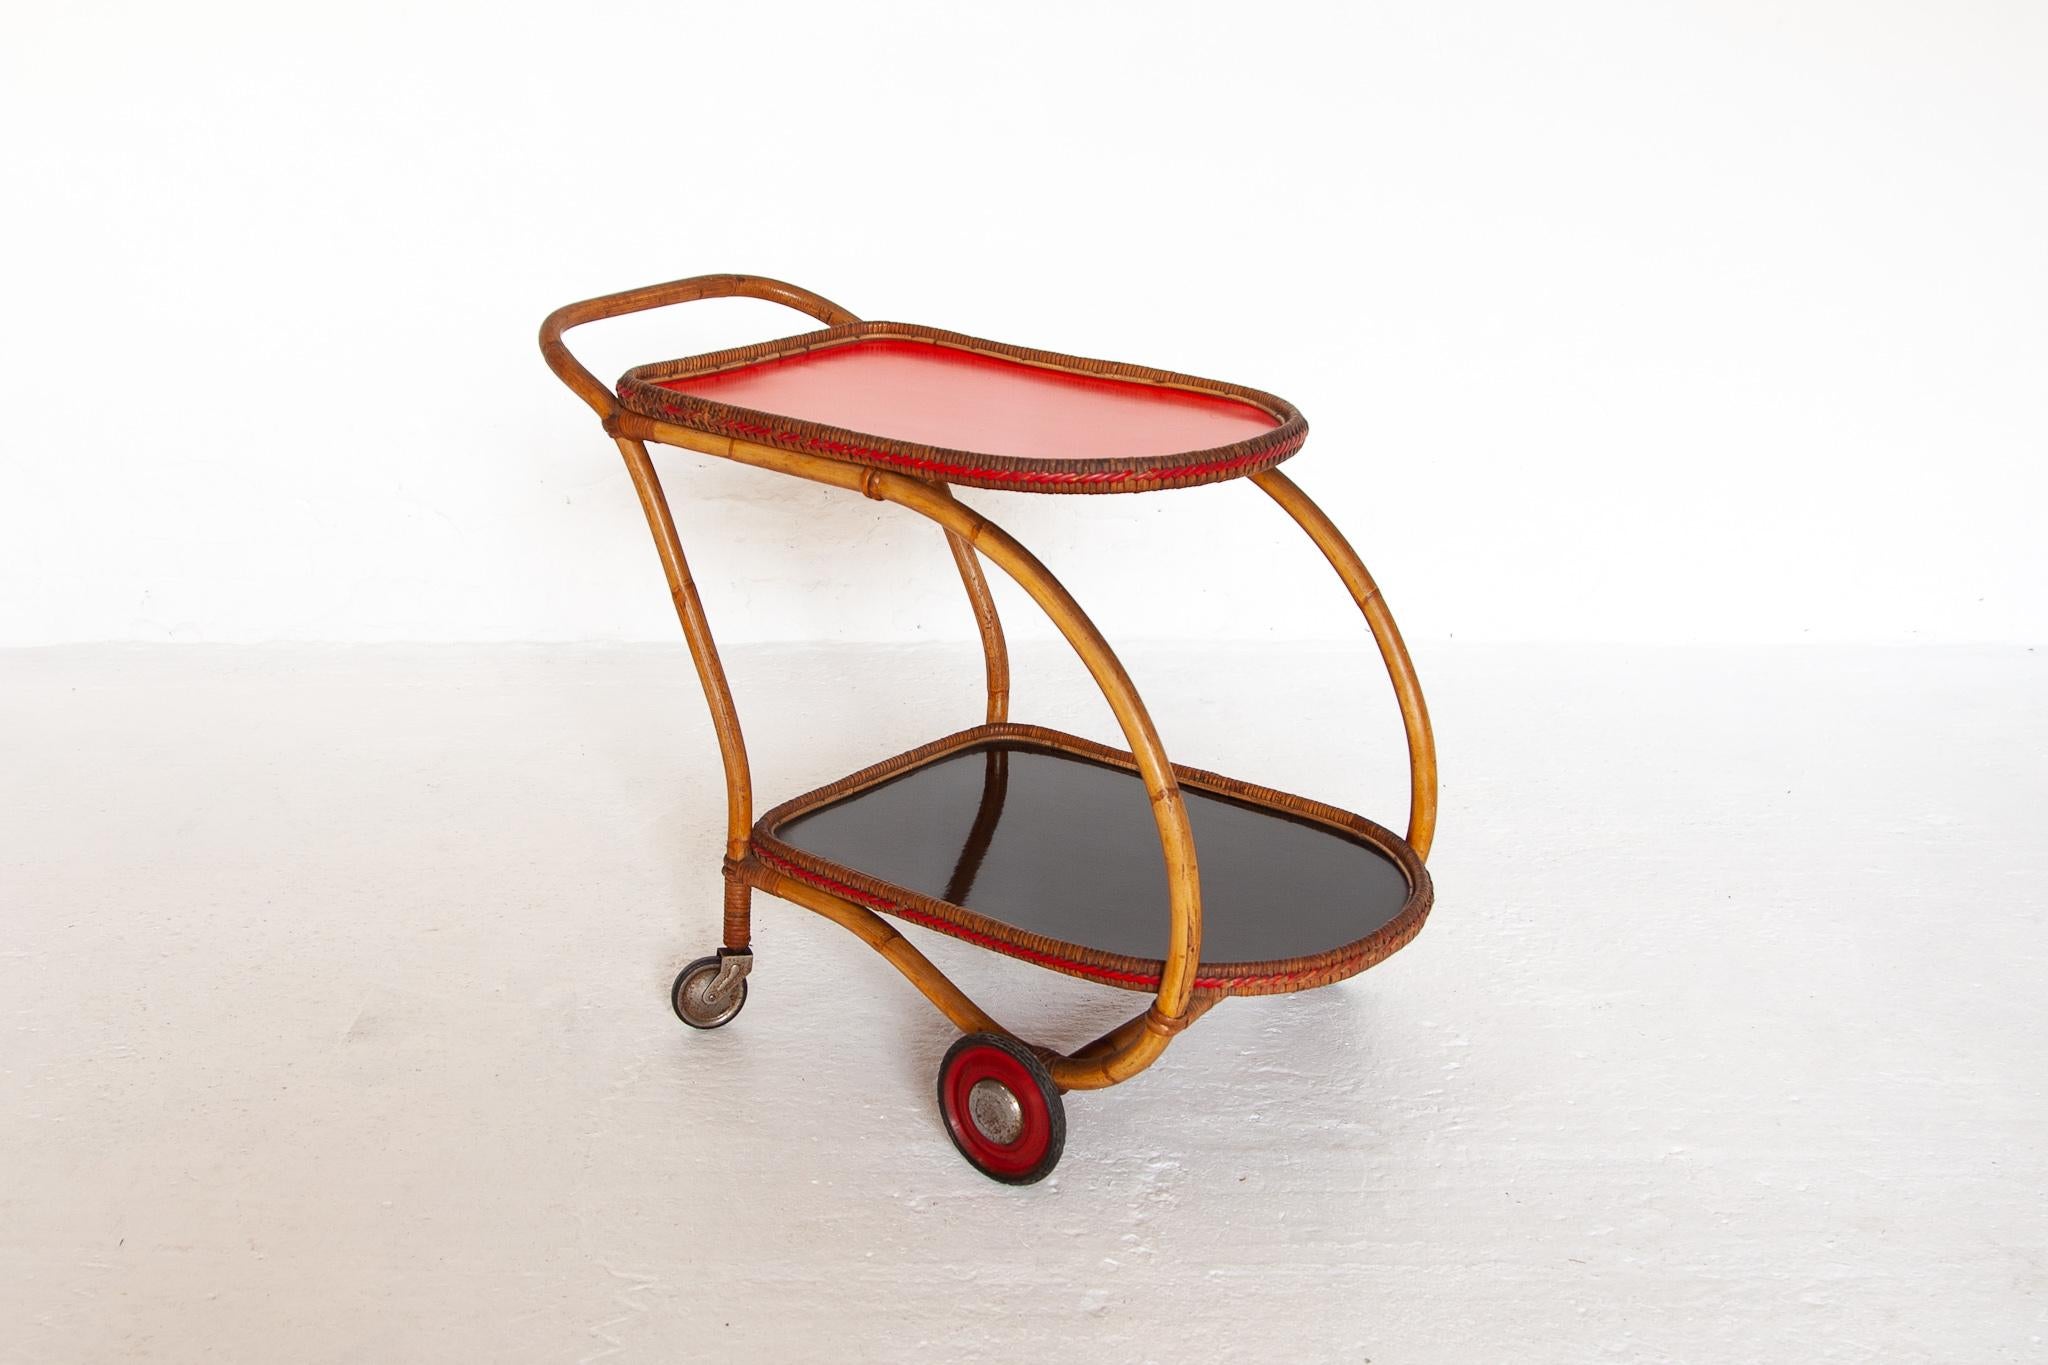 Hand-Crafted Bamboo Mid-Century Modern Bar Cart with a Red Touch, Italy, 1950s